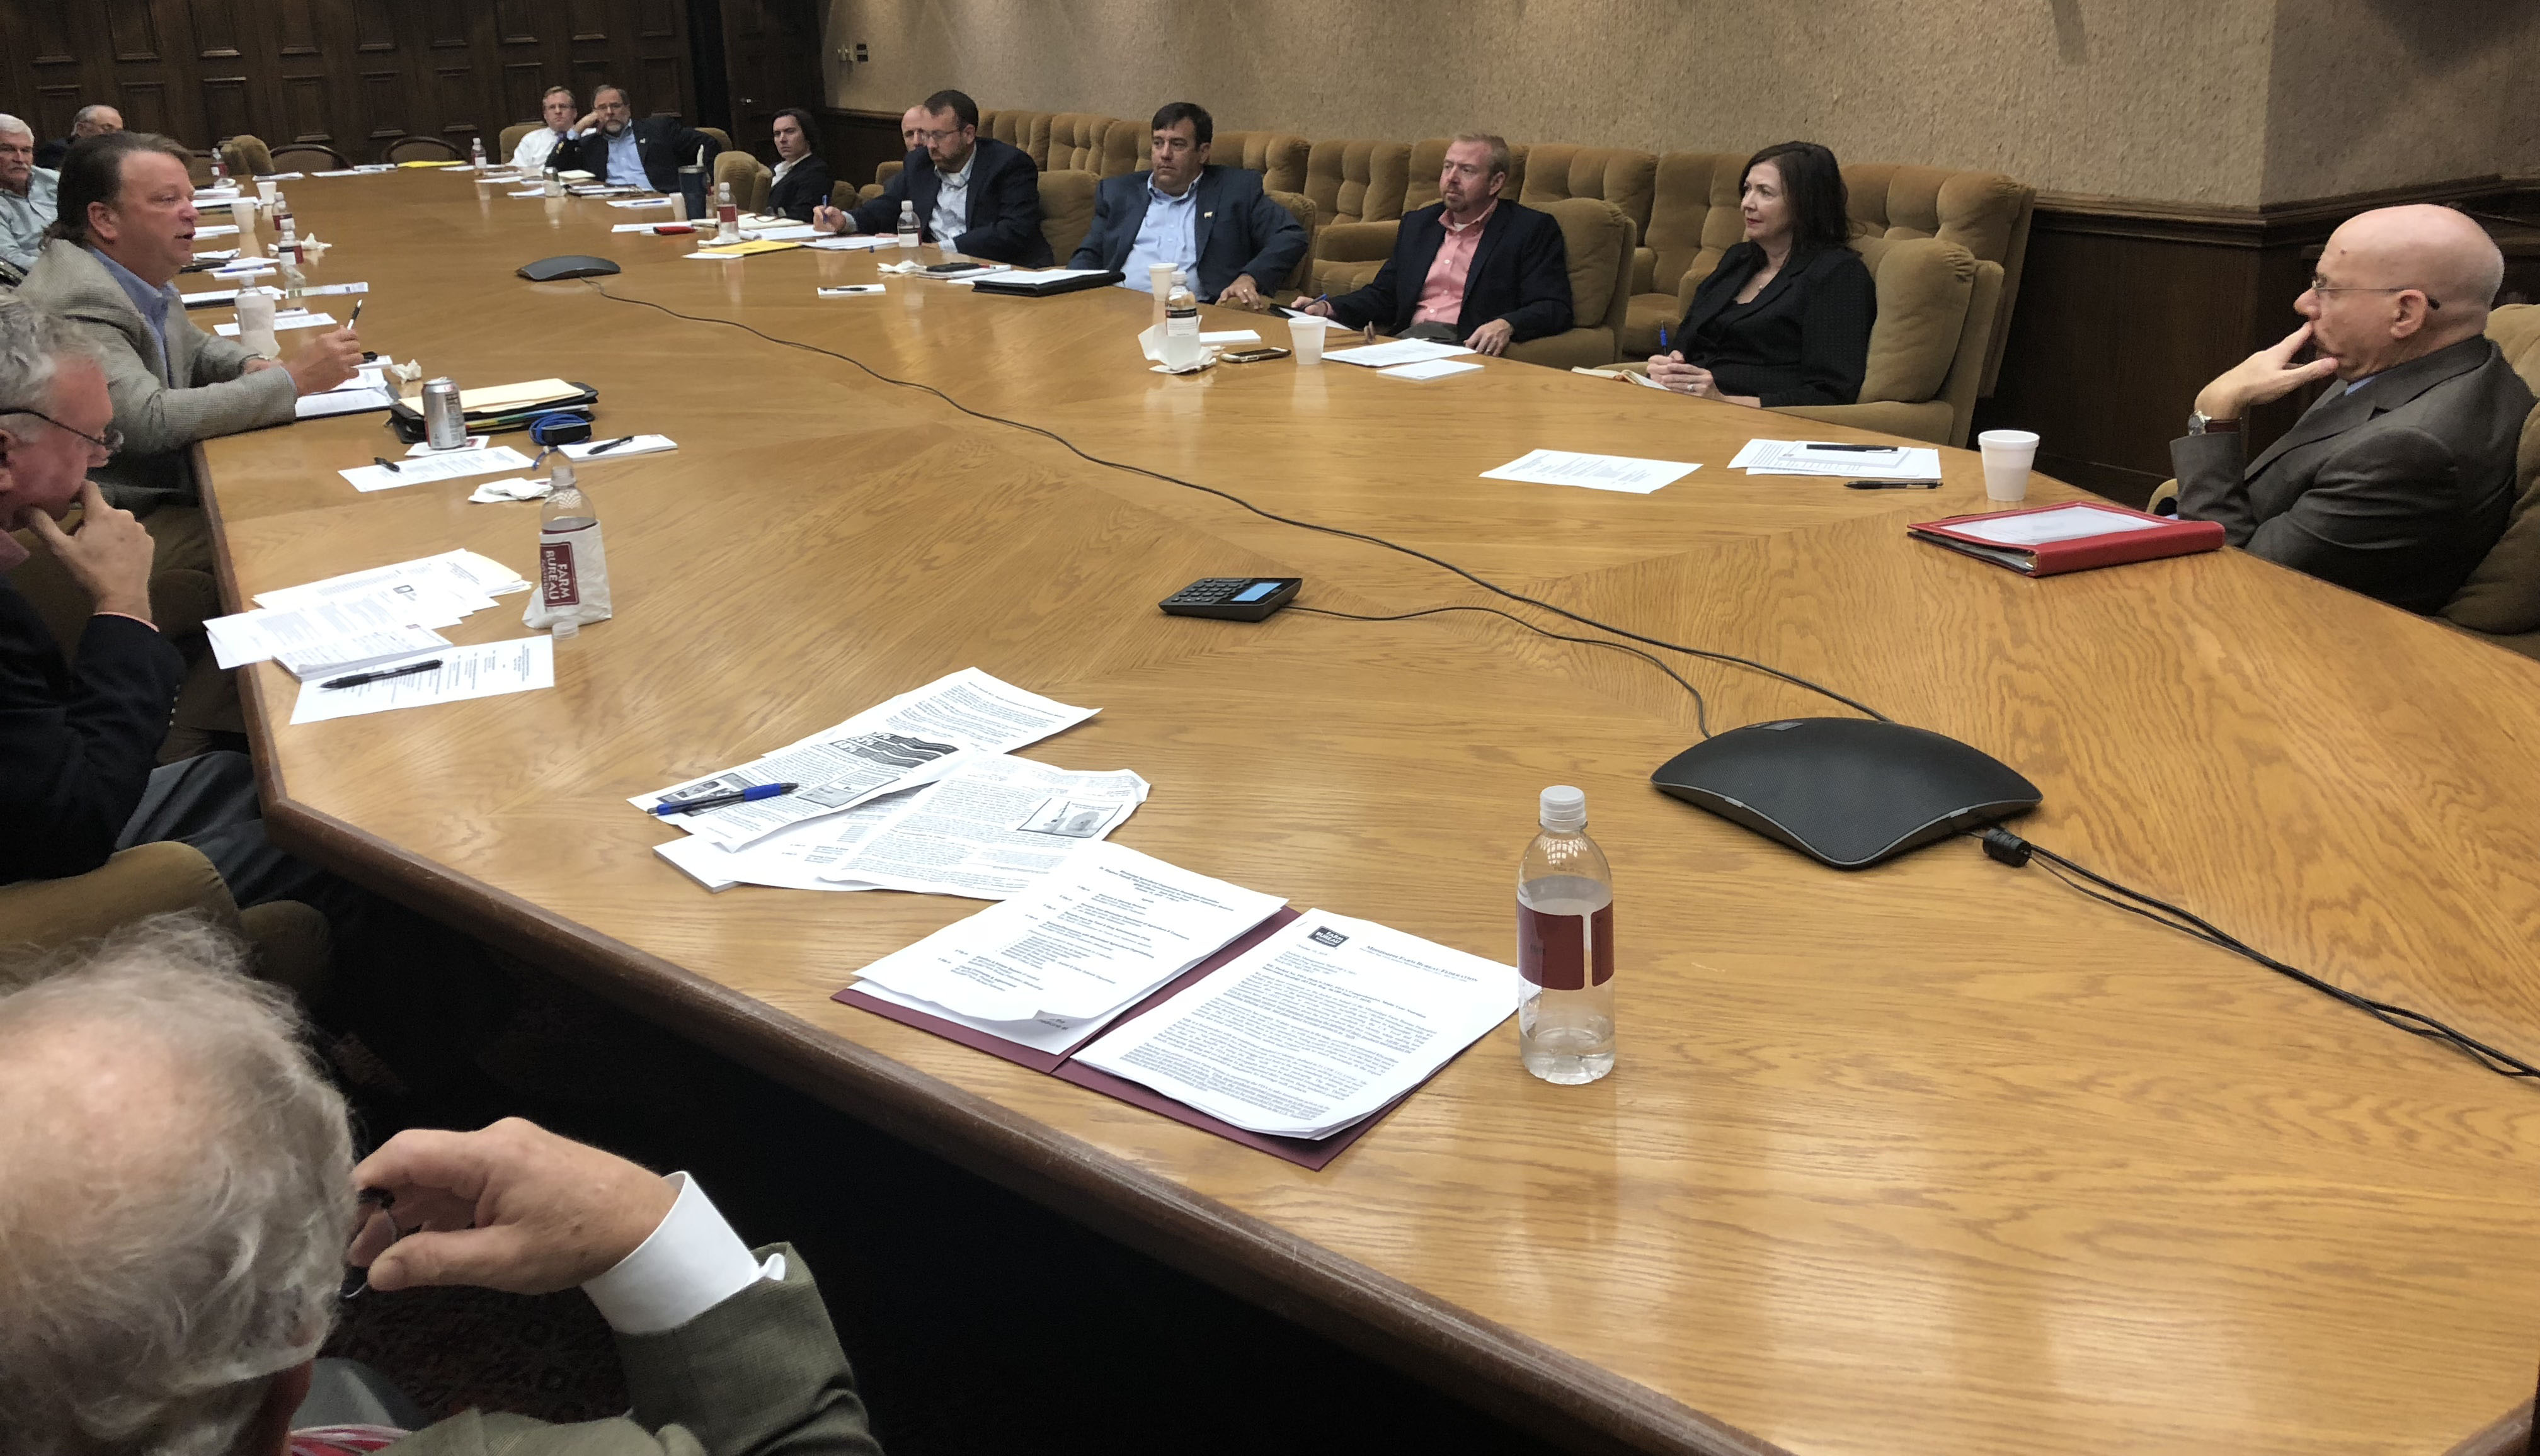 FDA round table discussion in Mississippi, group seated around large wooden table covered with papers